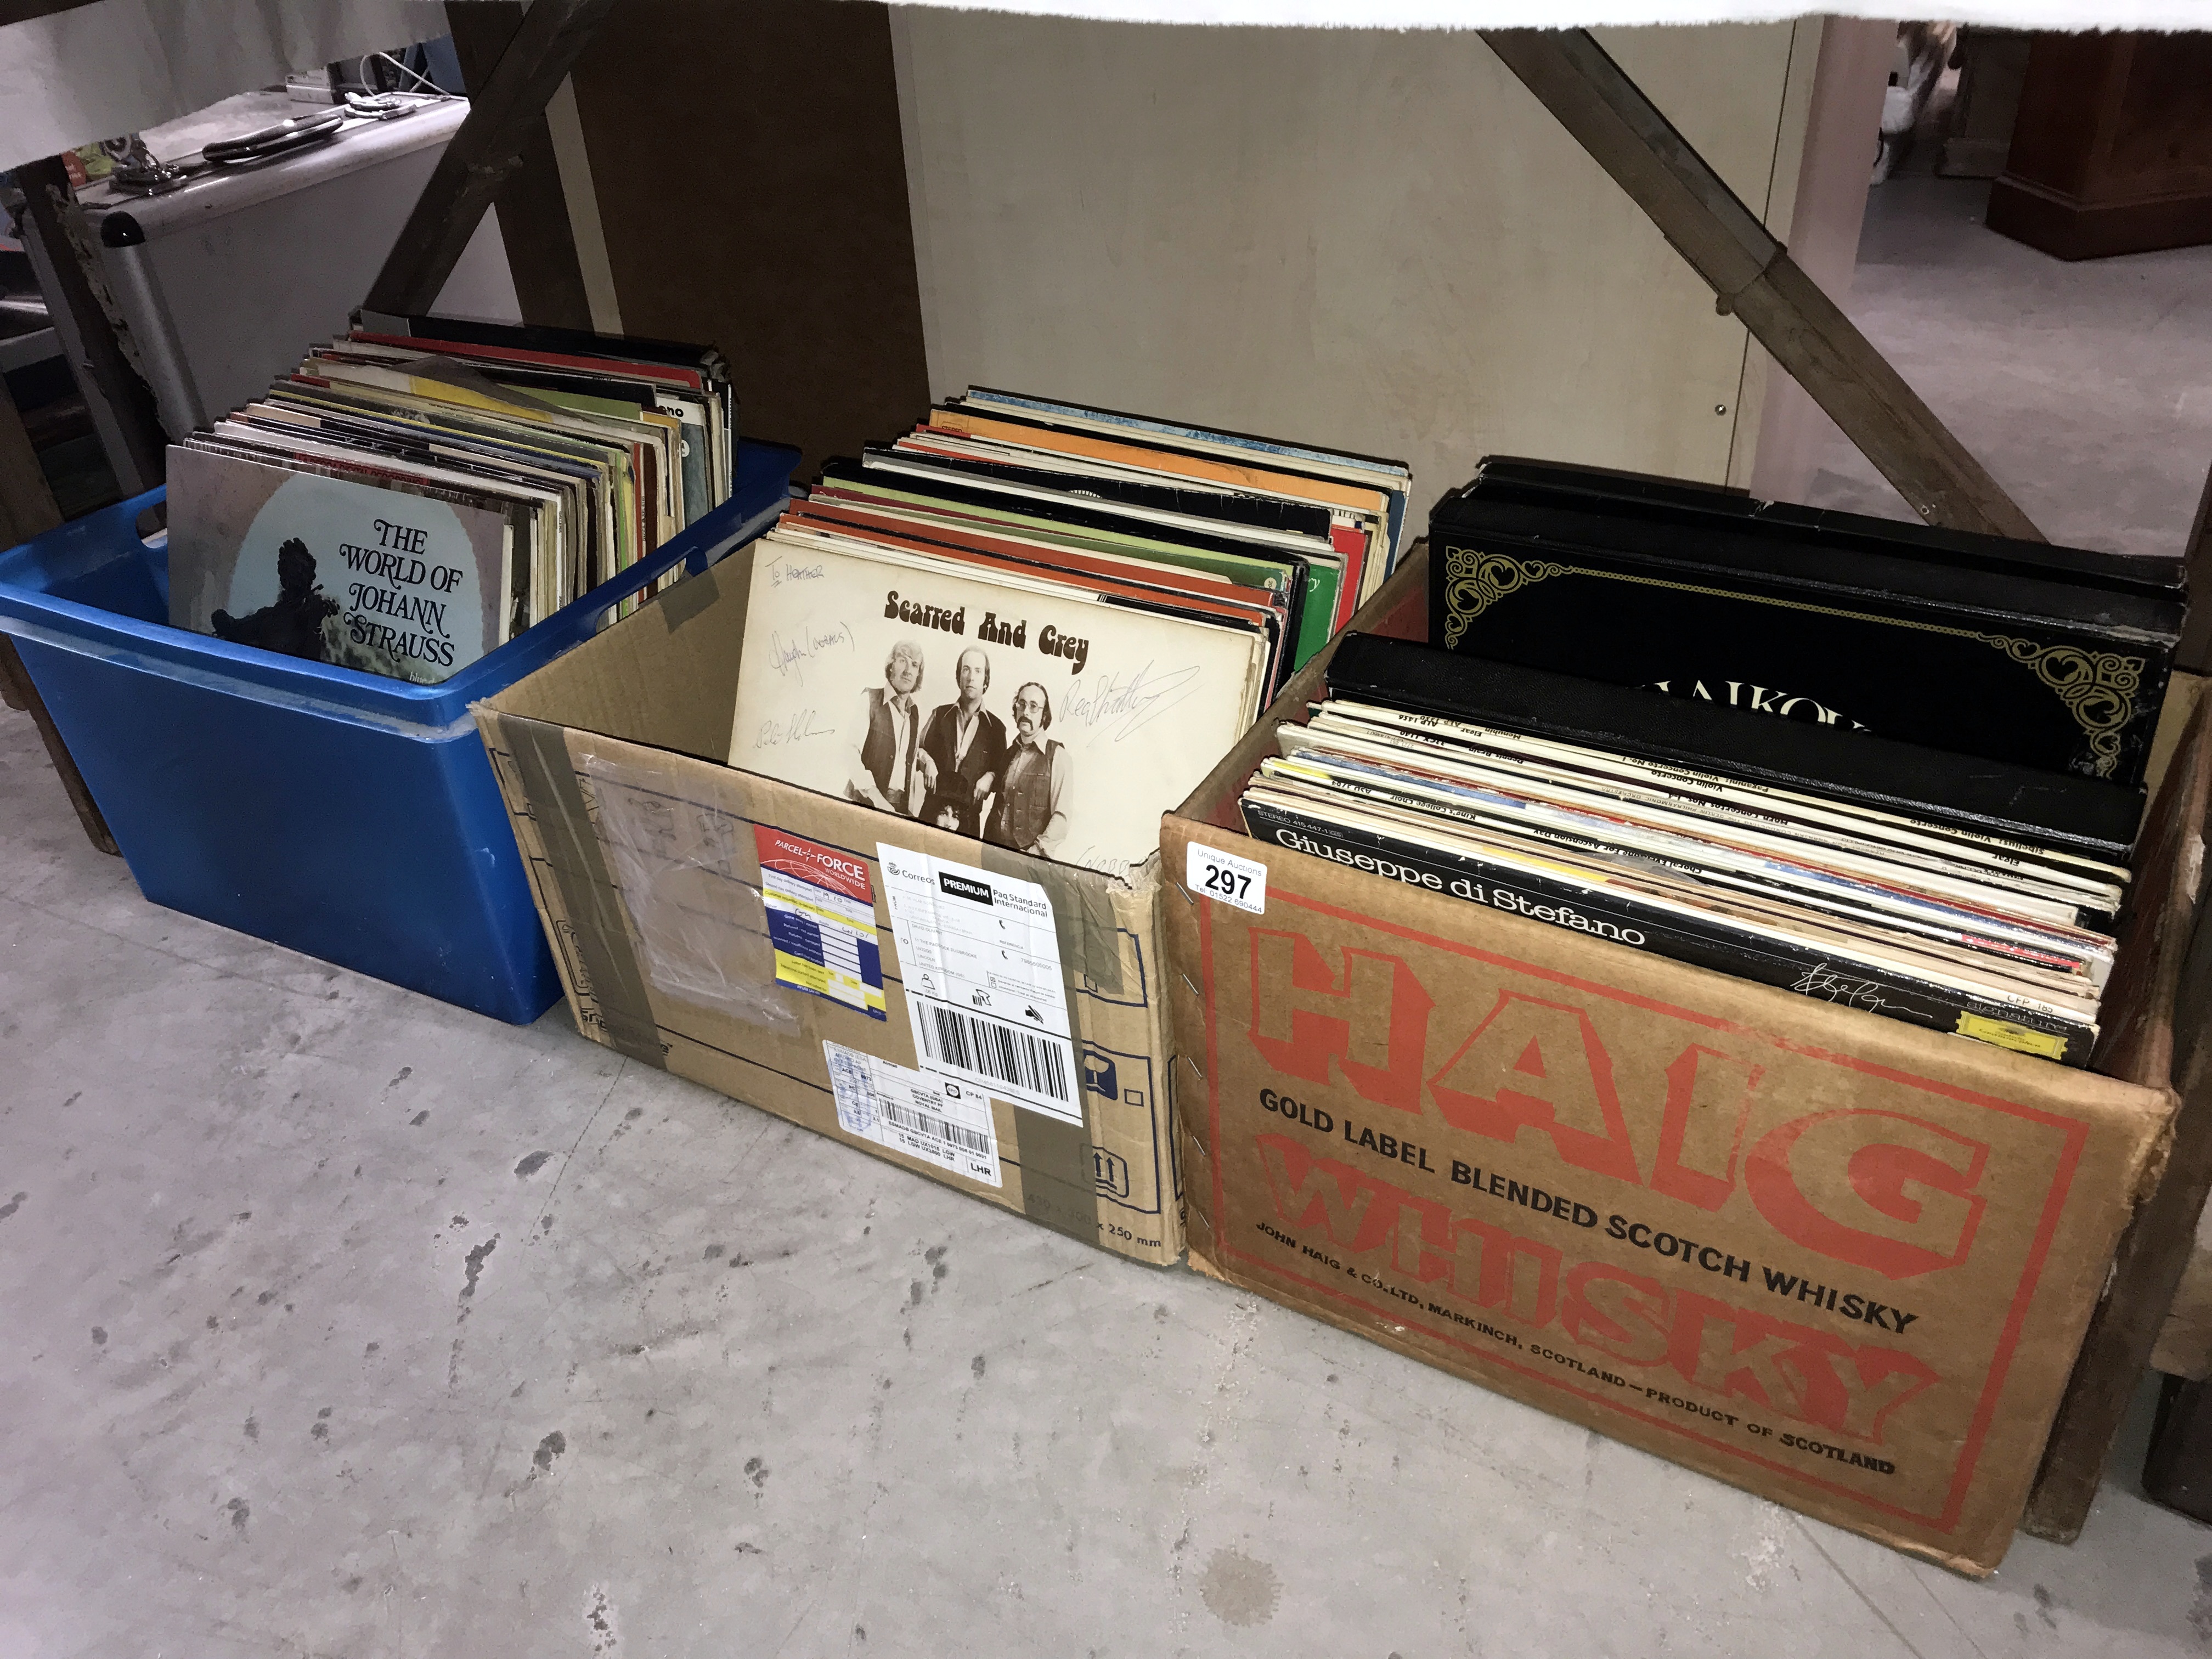 Over 150 classical LP records includes sxl wide band, asds,